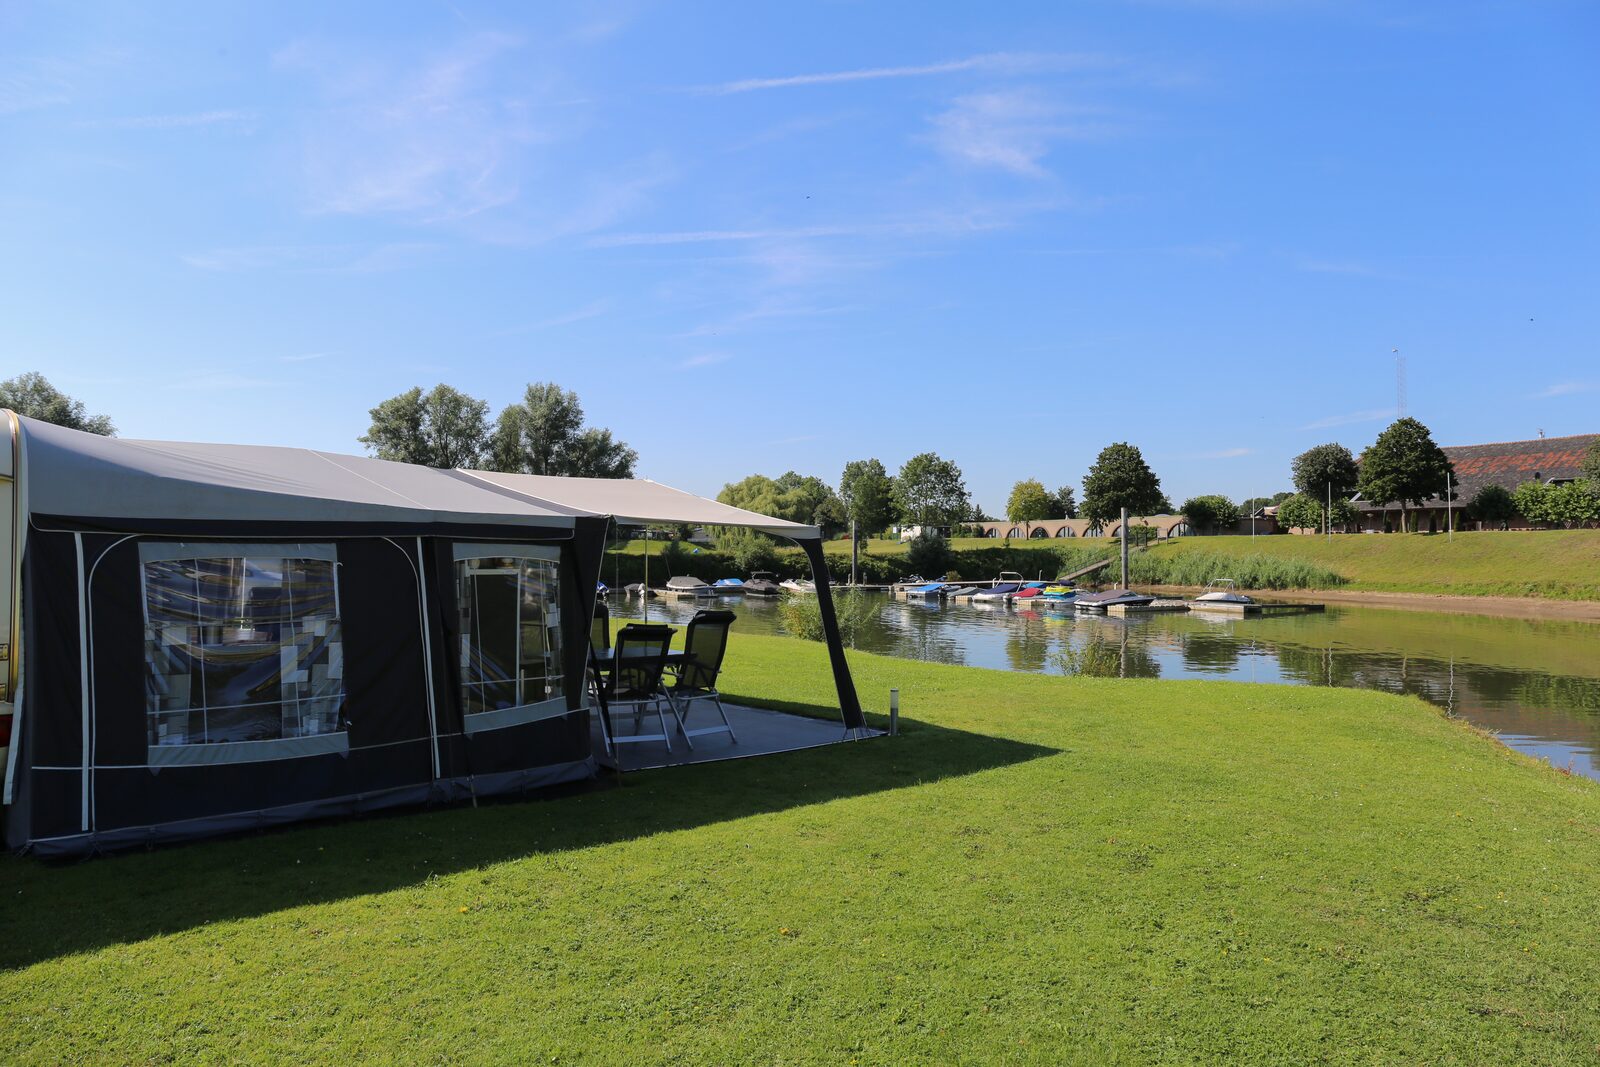 Discover our camping pitches